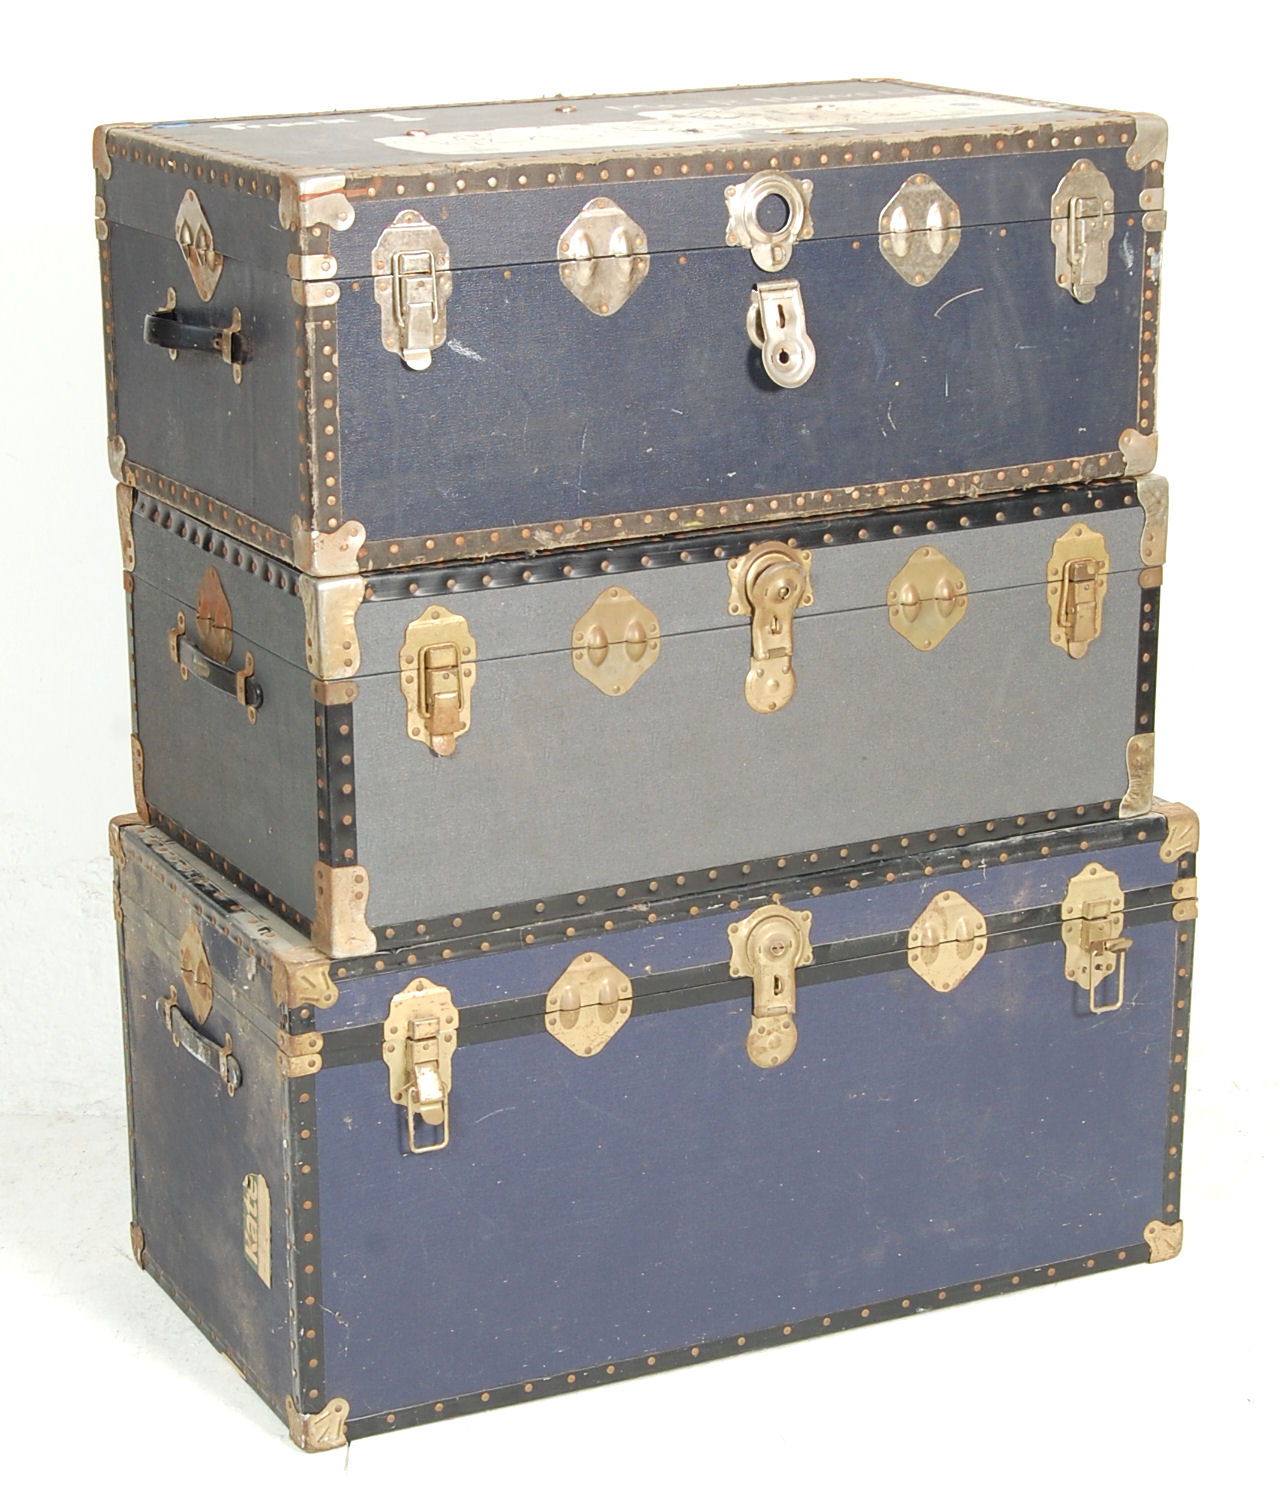 A collection of 3 vintage large early to mid 20th Century American canvas steamer / travel trunks.